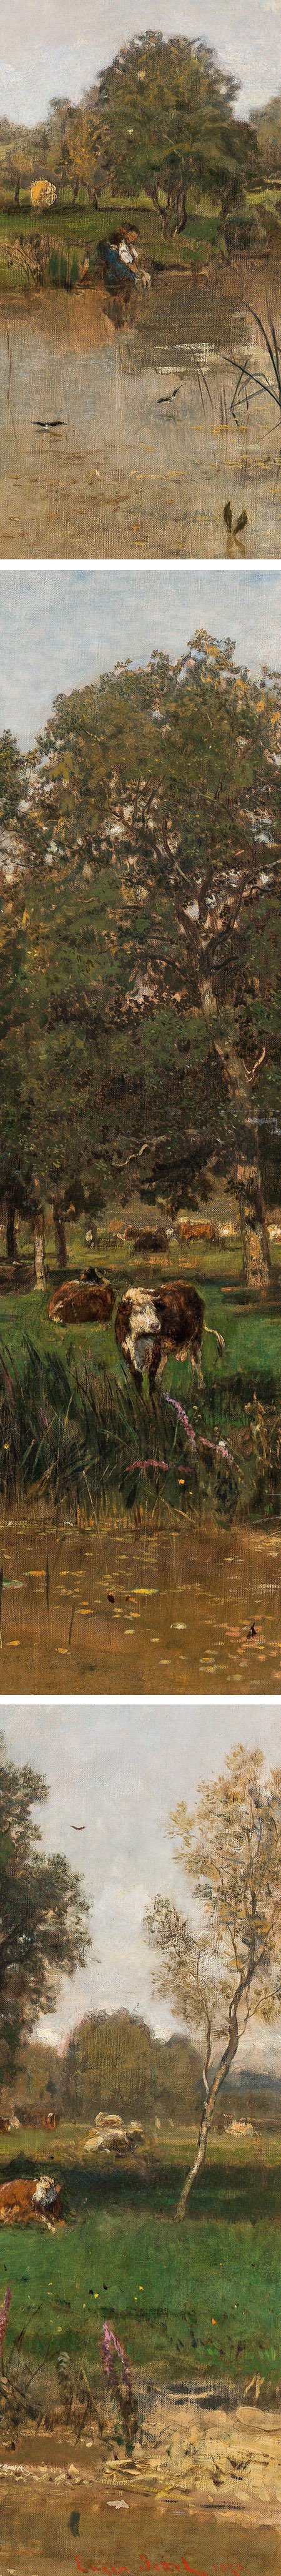 River Landscape with a Resting Herd, 19th century oil on canvas landscape painting by Eugen Jettel (details)